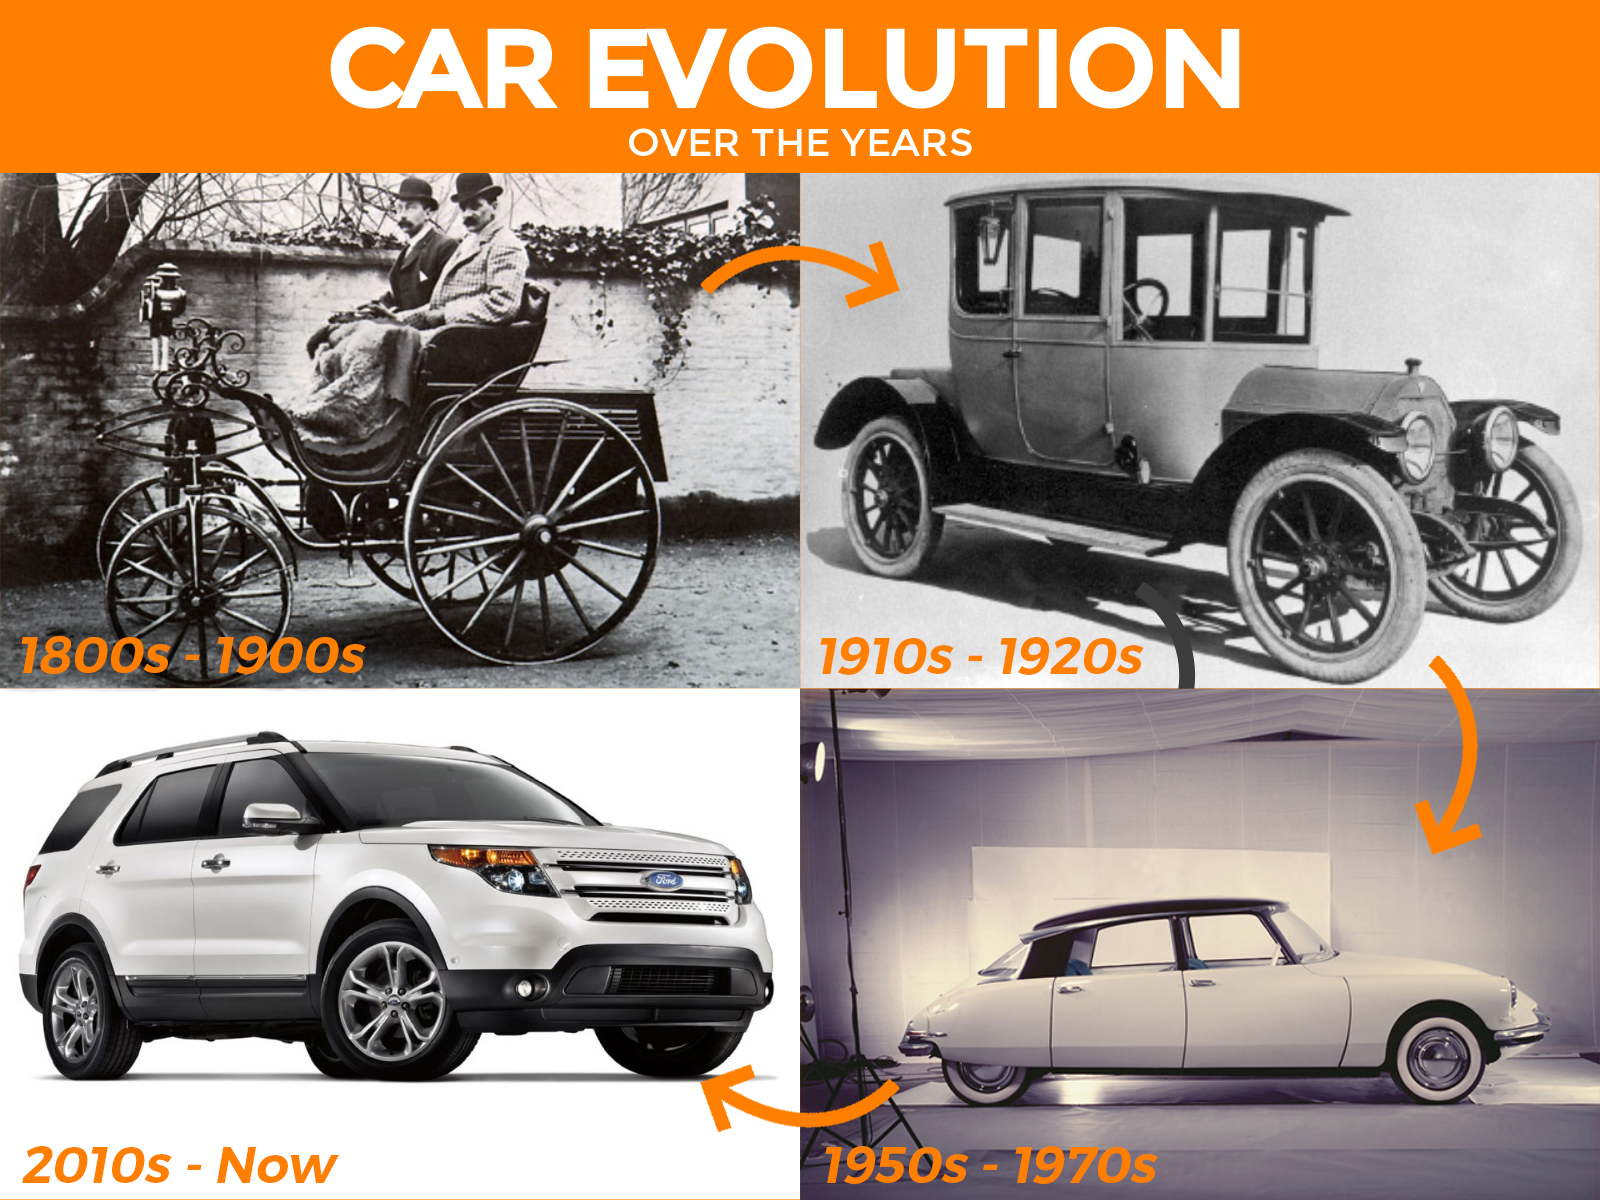 Car evolution over the years